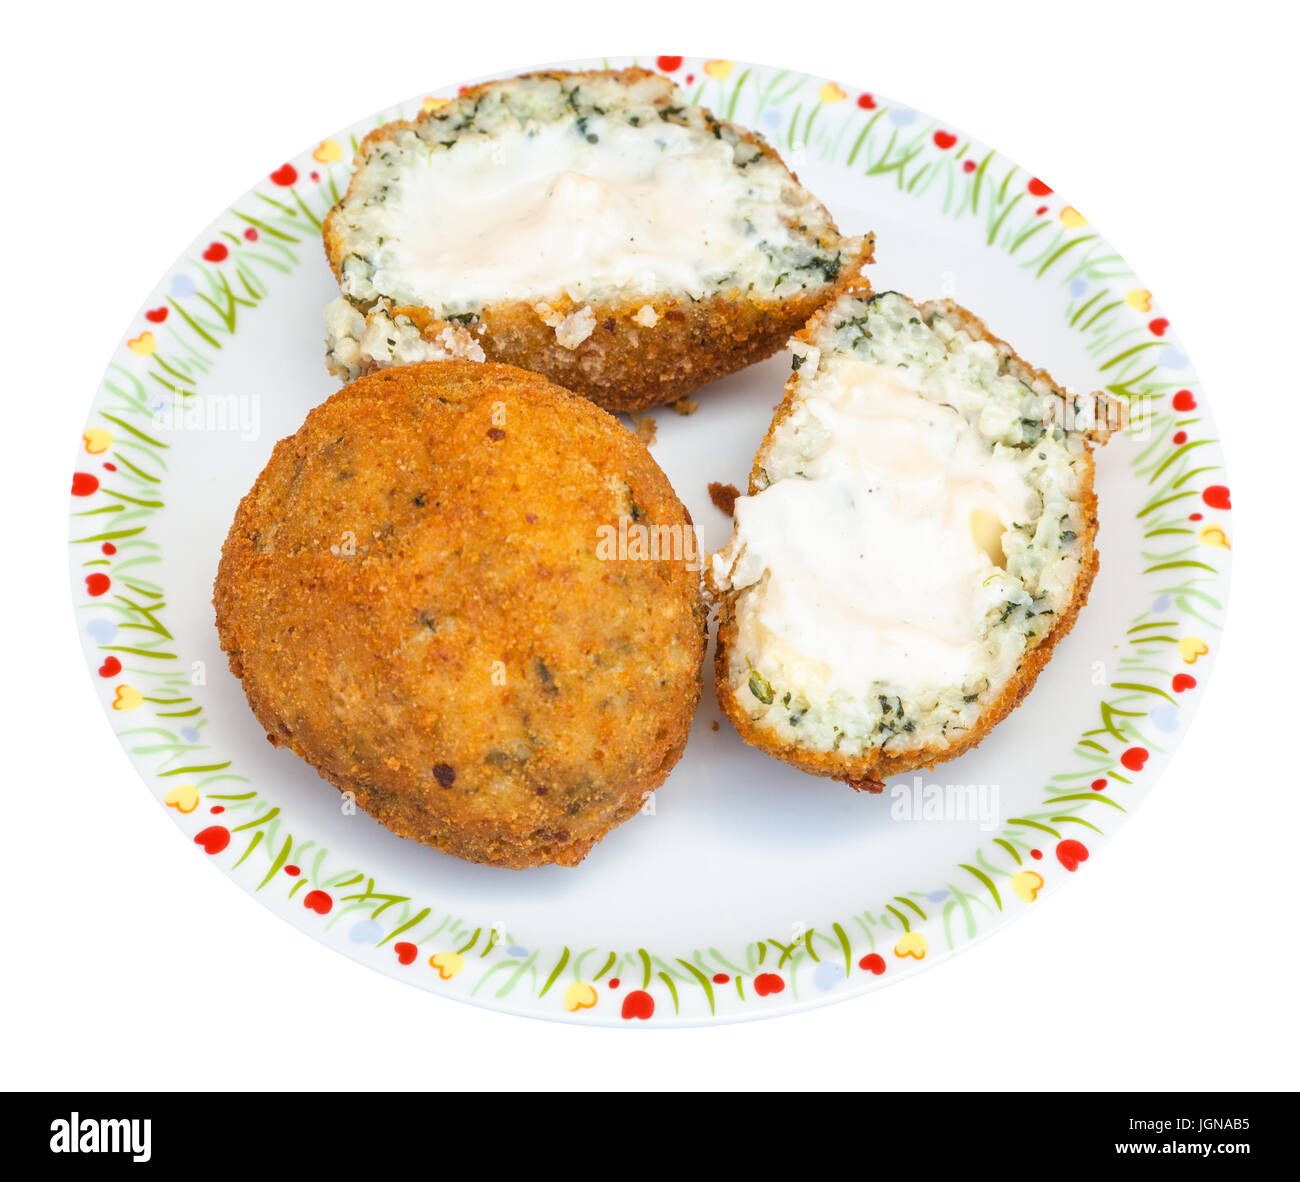 traditional sicilian street food - spinach stuffed rice balls arancini on plate isolated on white background Stock Photo